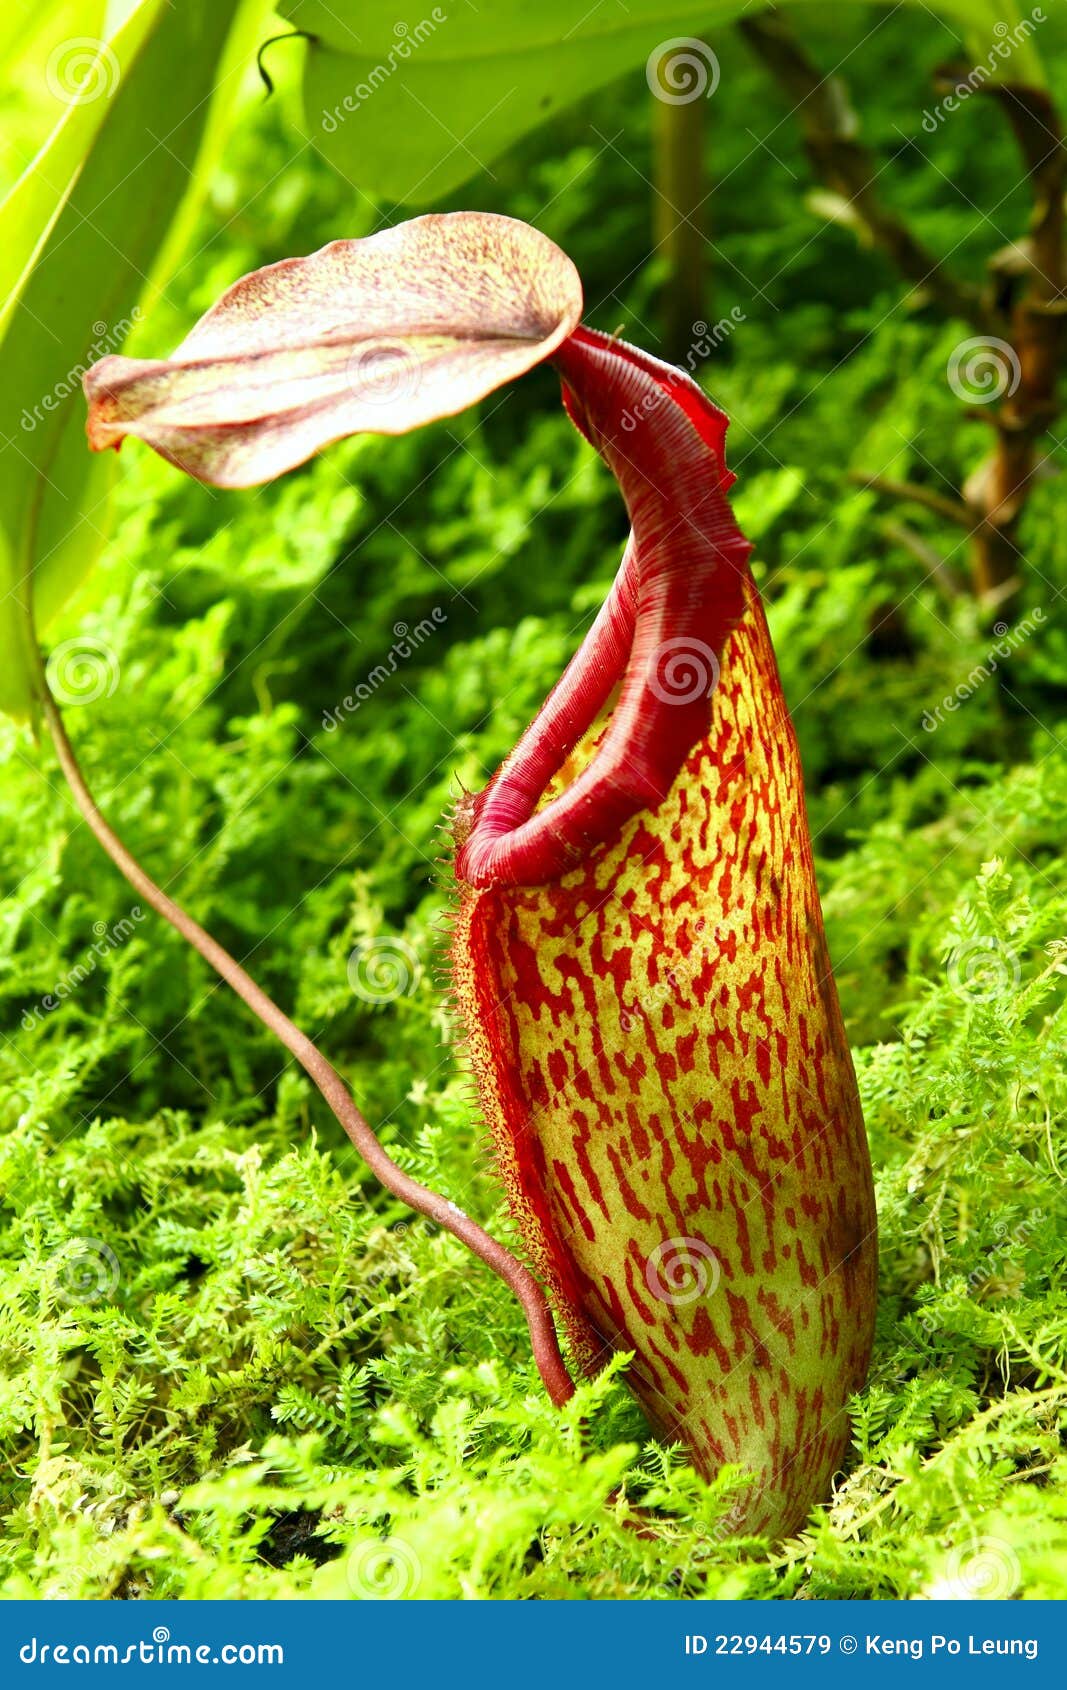 Nepenthe Tropical Carnivore Plant Royalty Free Stock Images - Image ...